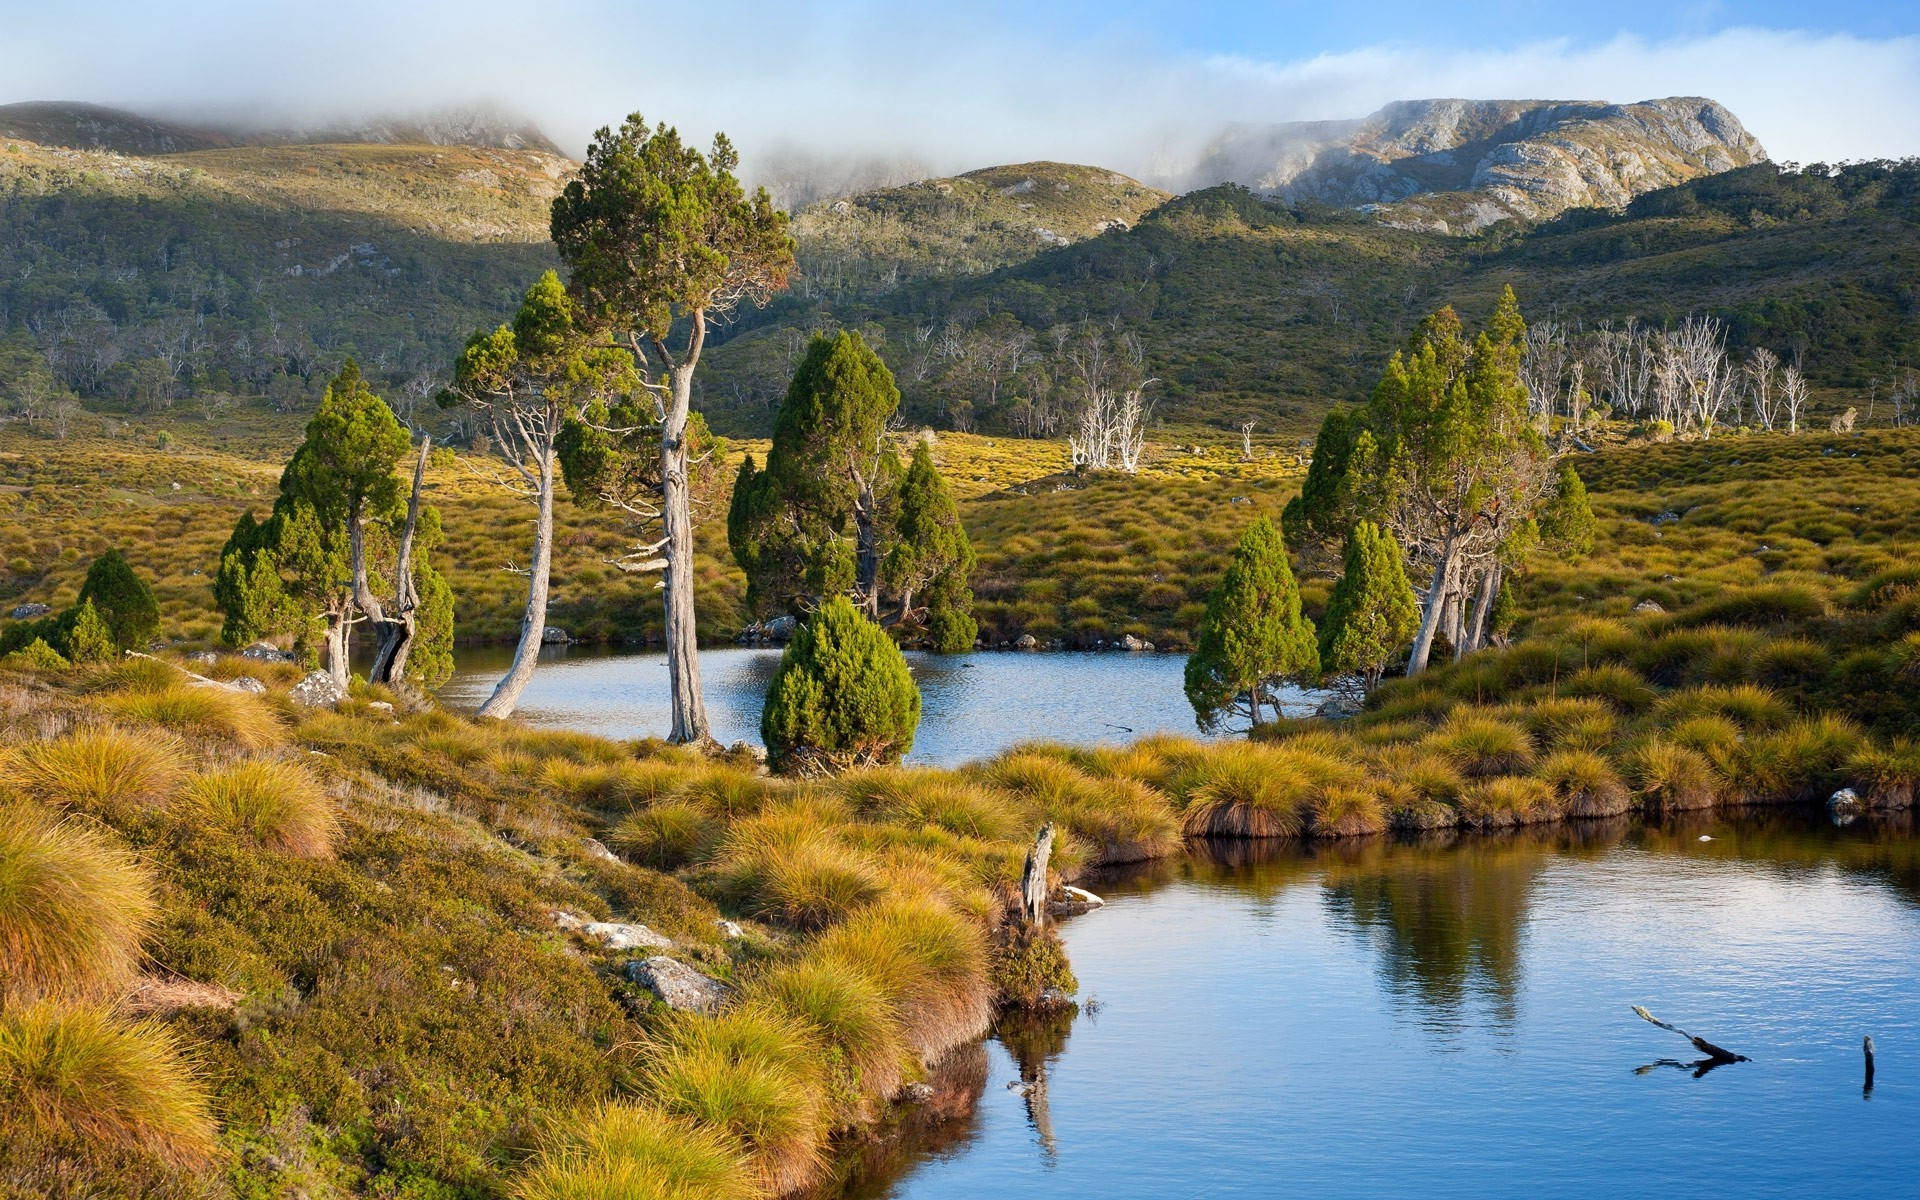 Tasmaniatwo Ponds Can Be Translated To Spanish As 